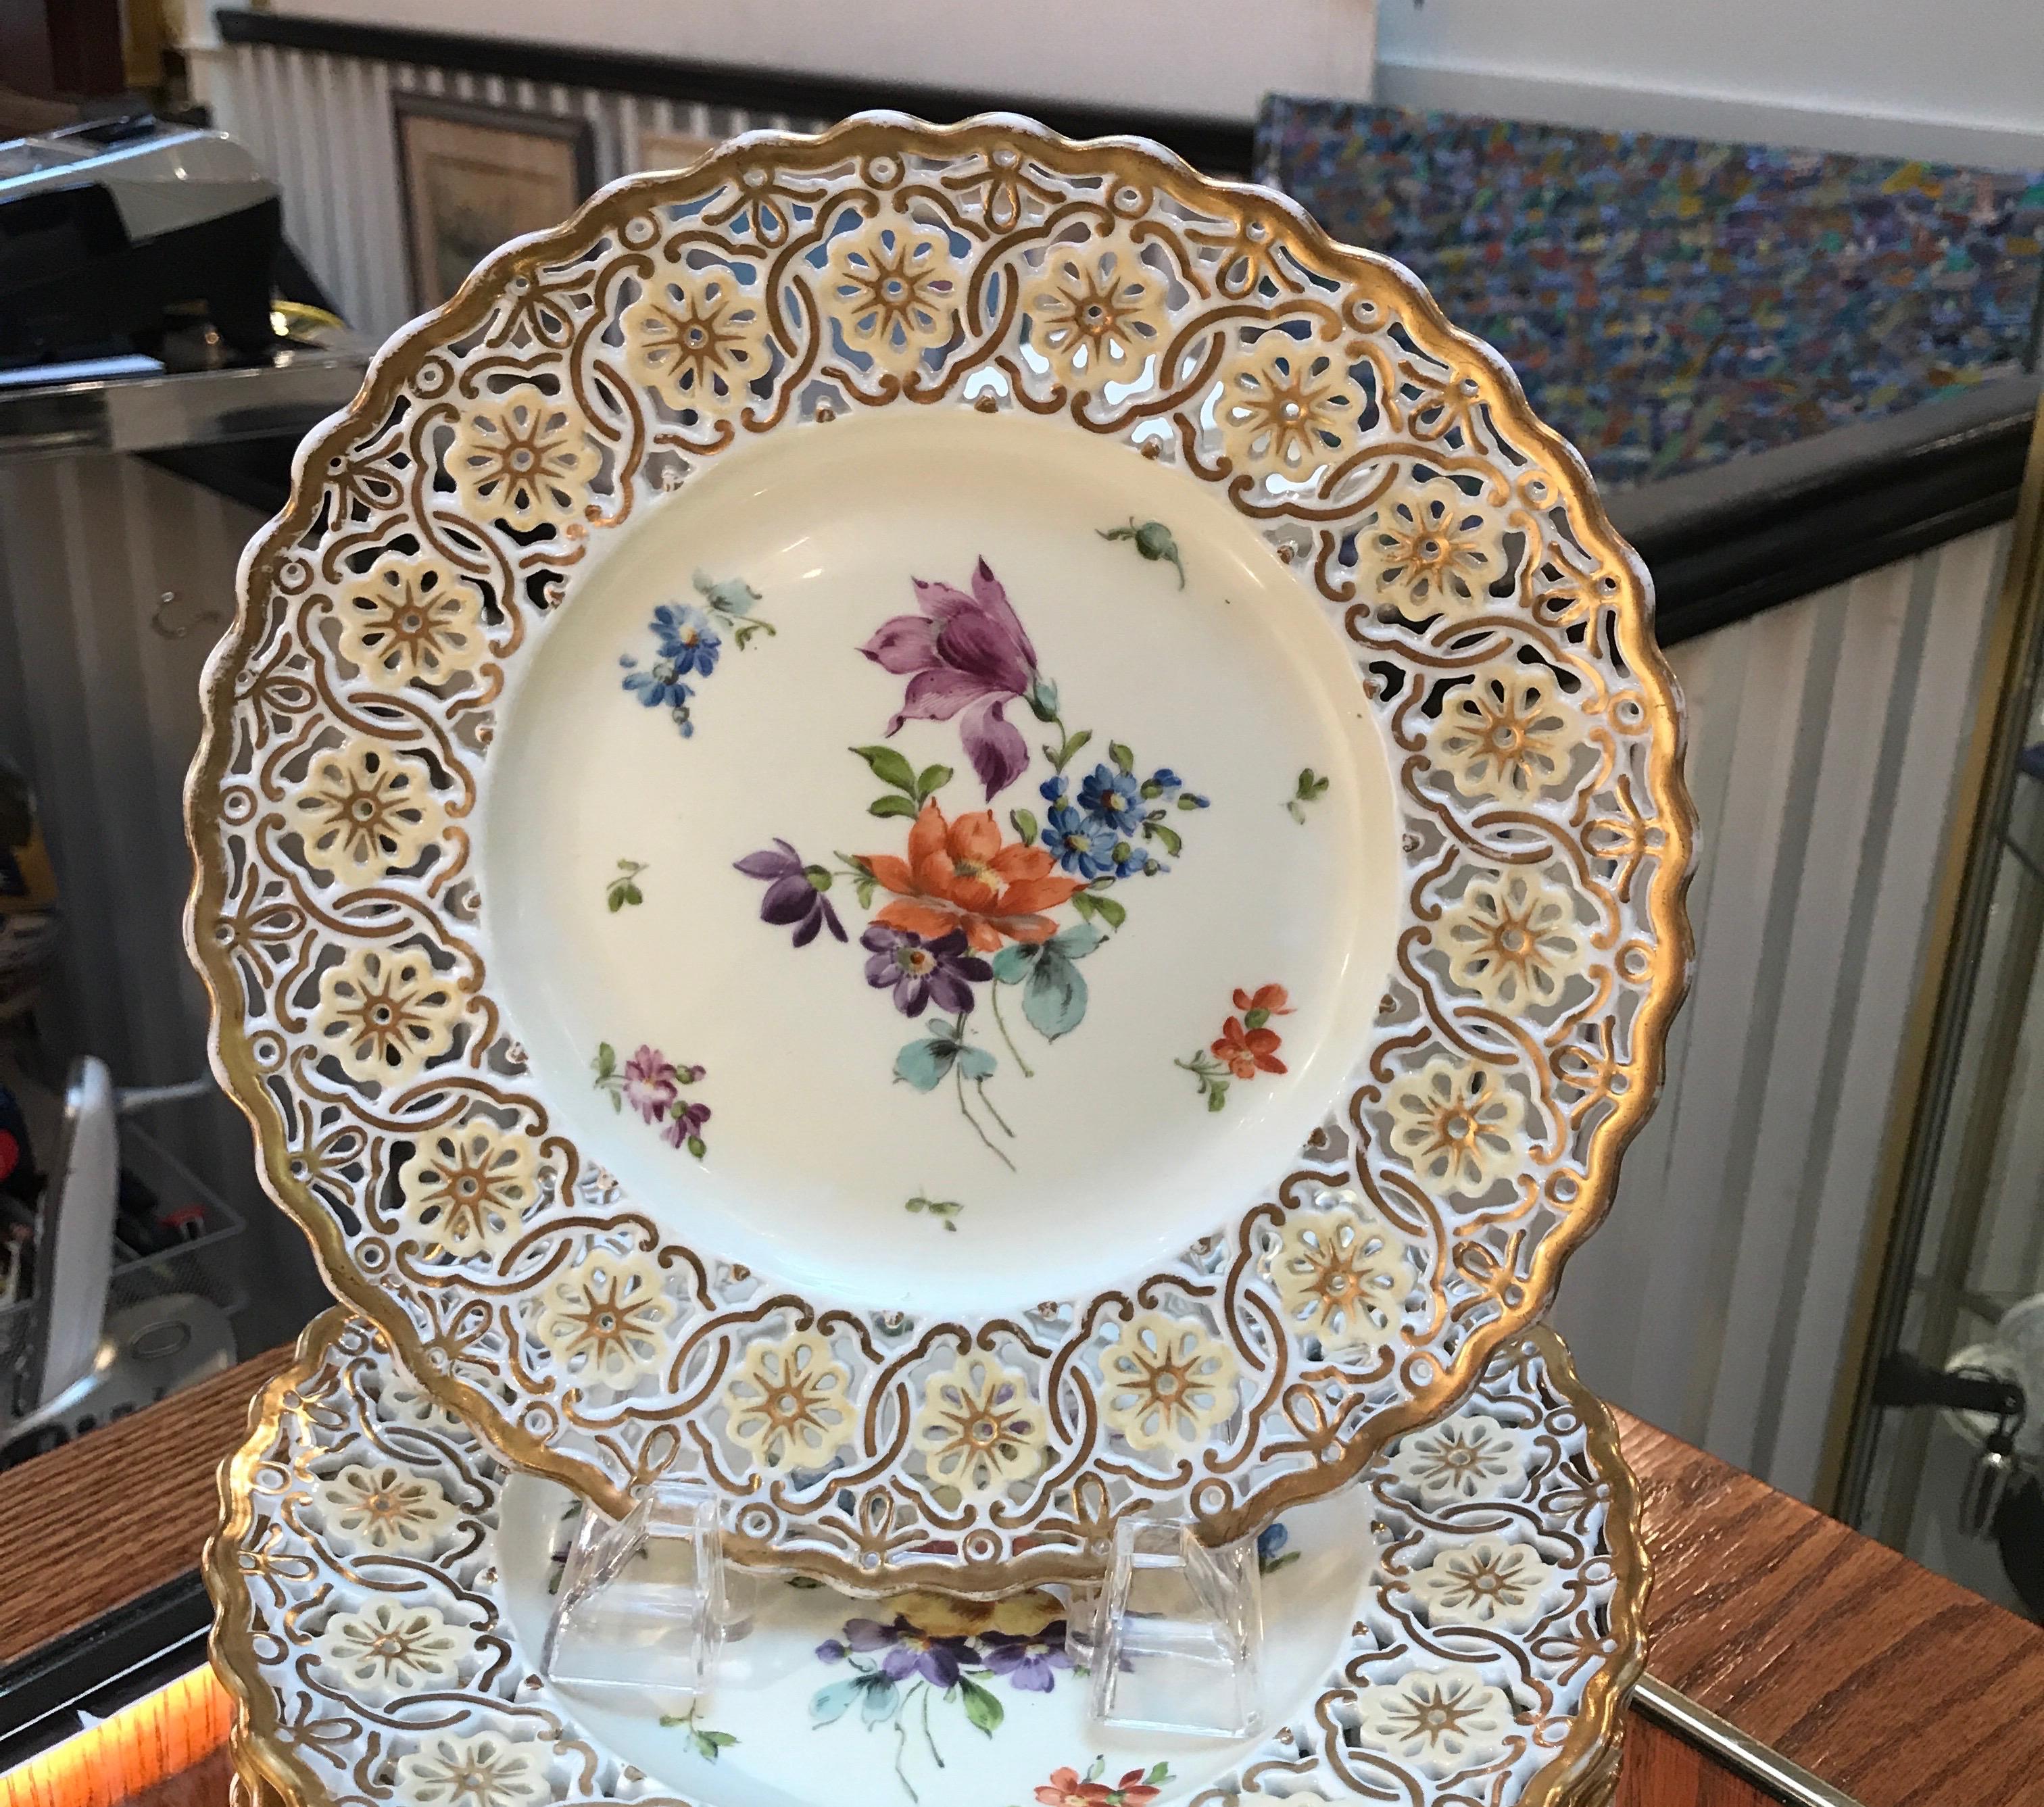 Beautiful hand painted German porcelain plates with Dresden floral decoration. The borders with pierced and gilt all around. Marked made in Germany, circa 1920. Perfect as cabinet plates or accent plates. Measures 8.75 inches in diameter.